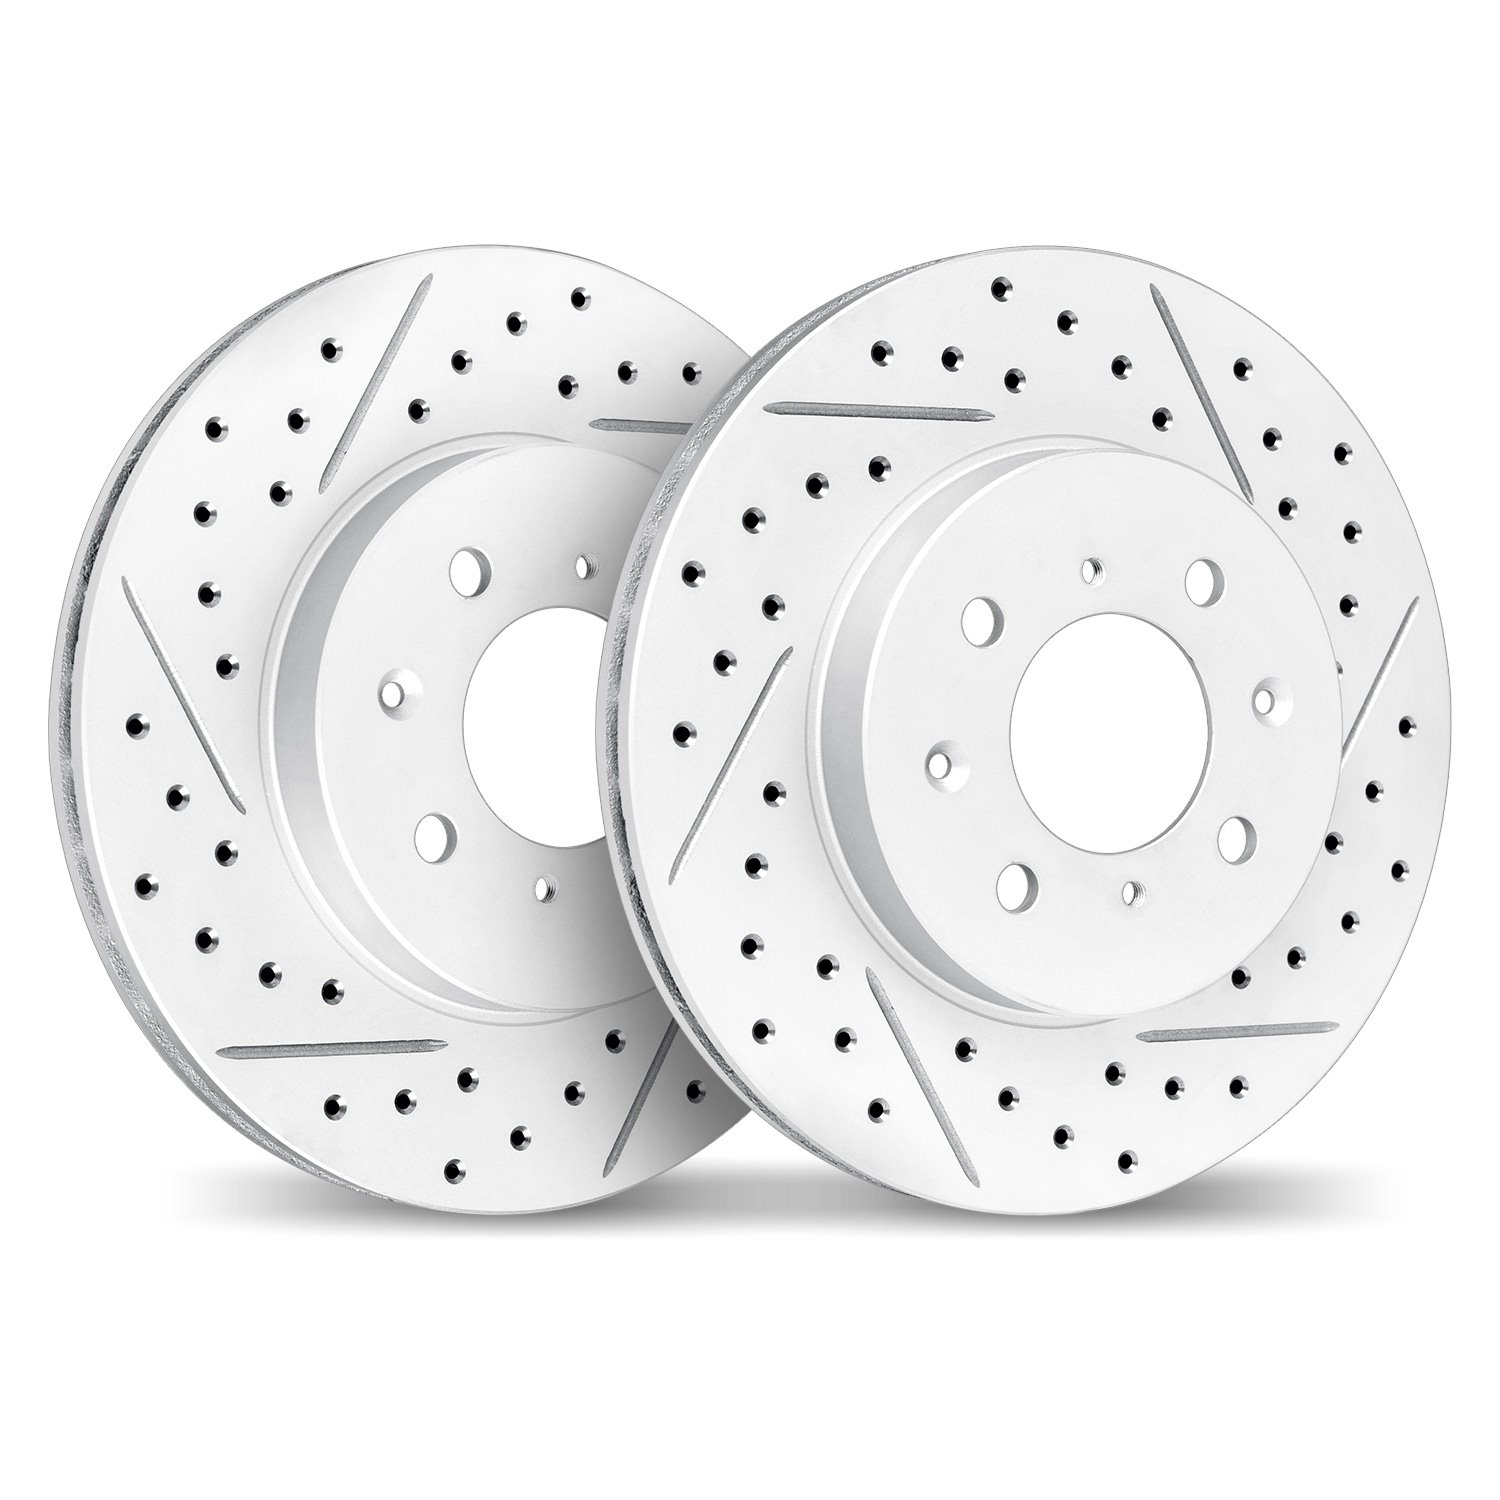 2002-32002 Geoperformance Drilled/Slotted Brake Rotors, 2007-2015 Mini, Position: Front